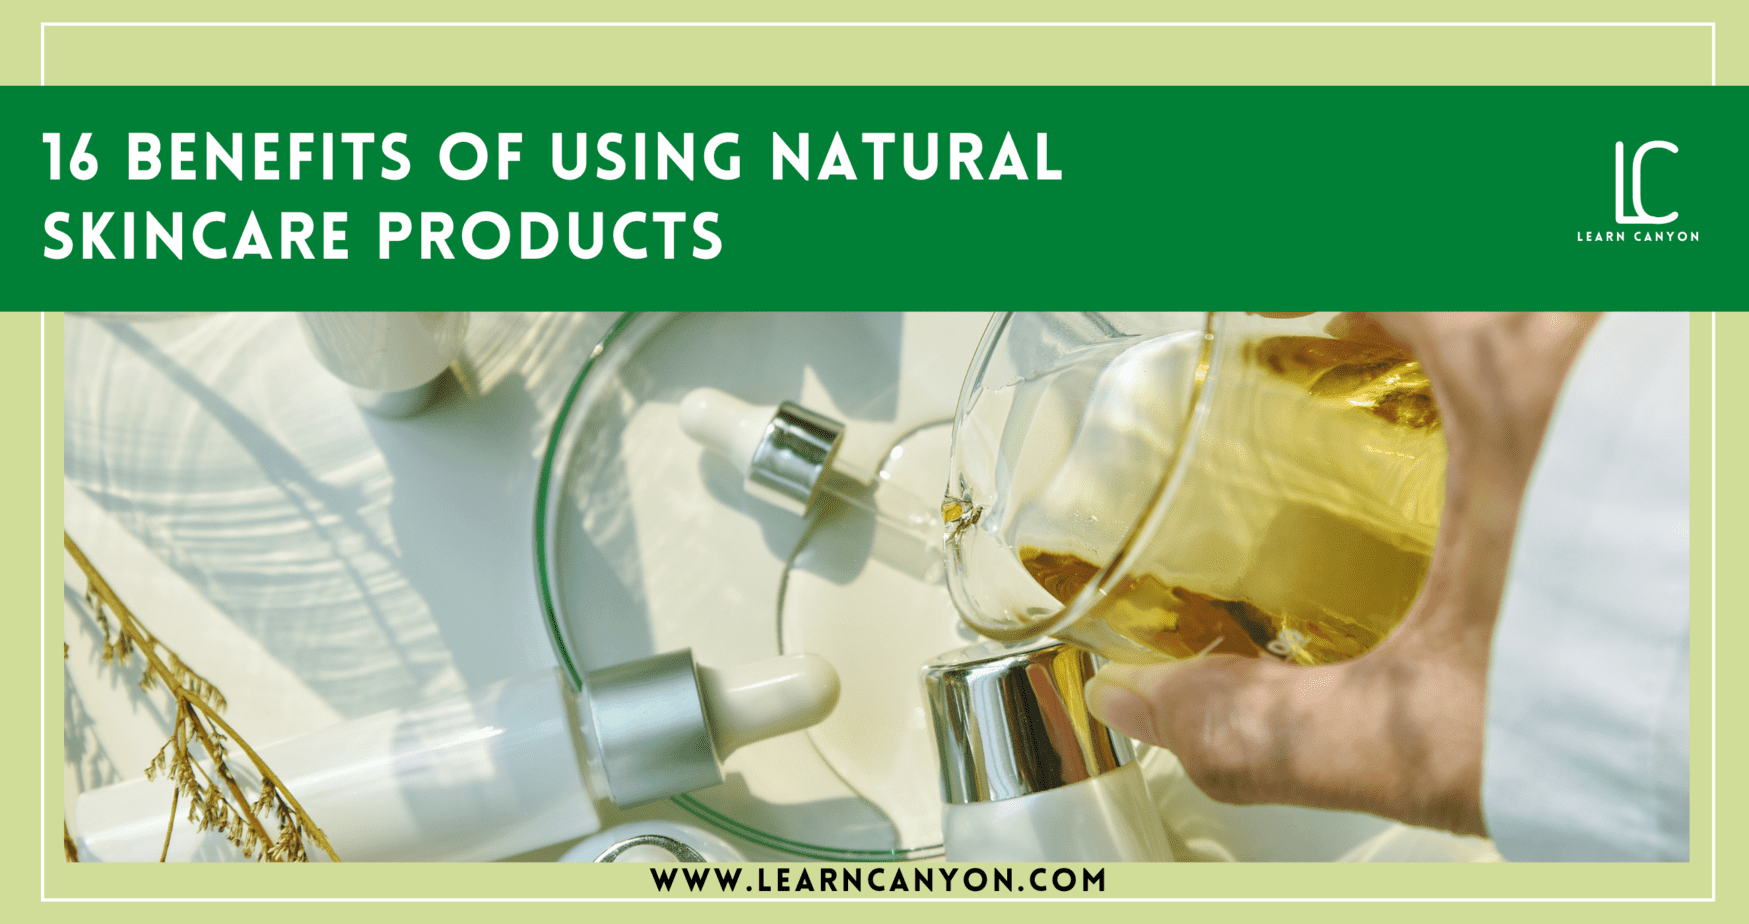 Natural' beauty part 2: Health and healing heavily influences formulations